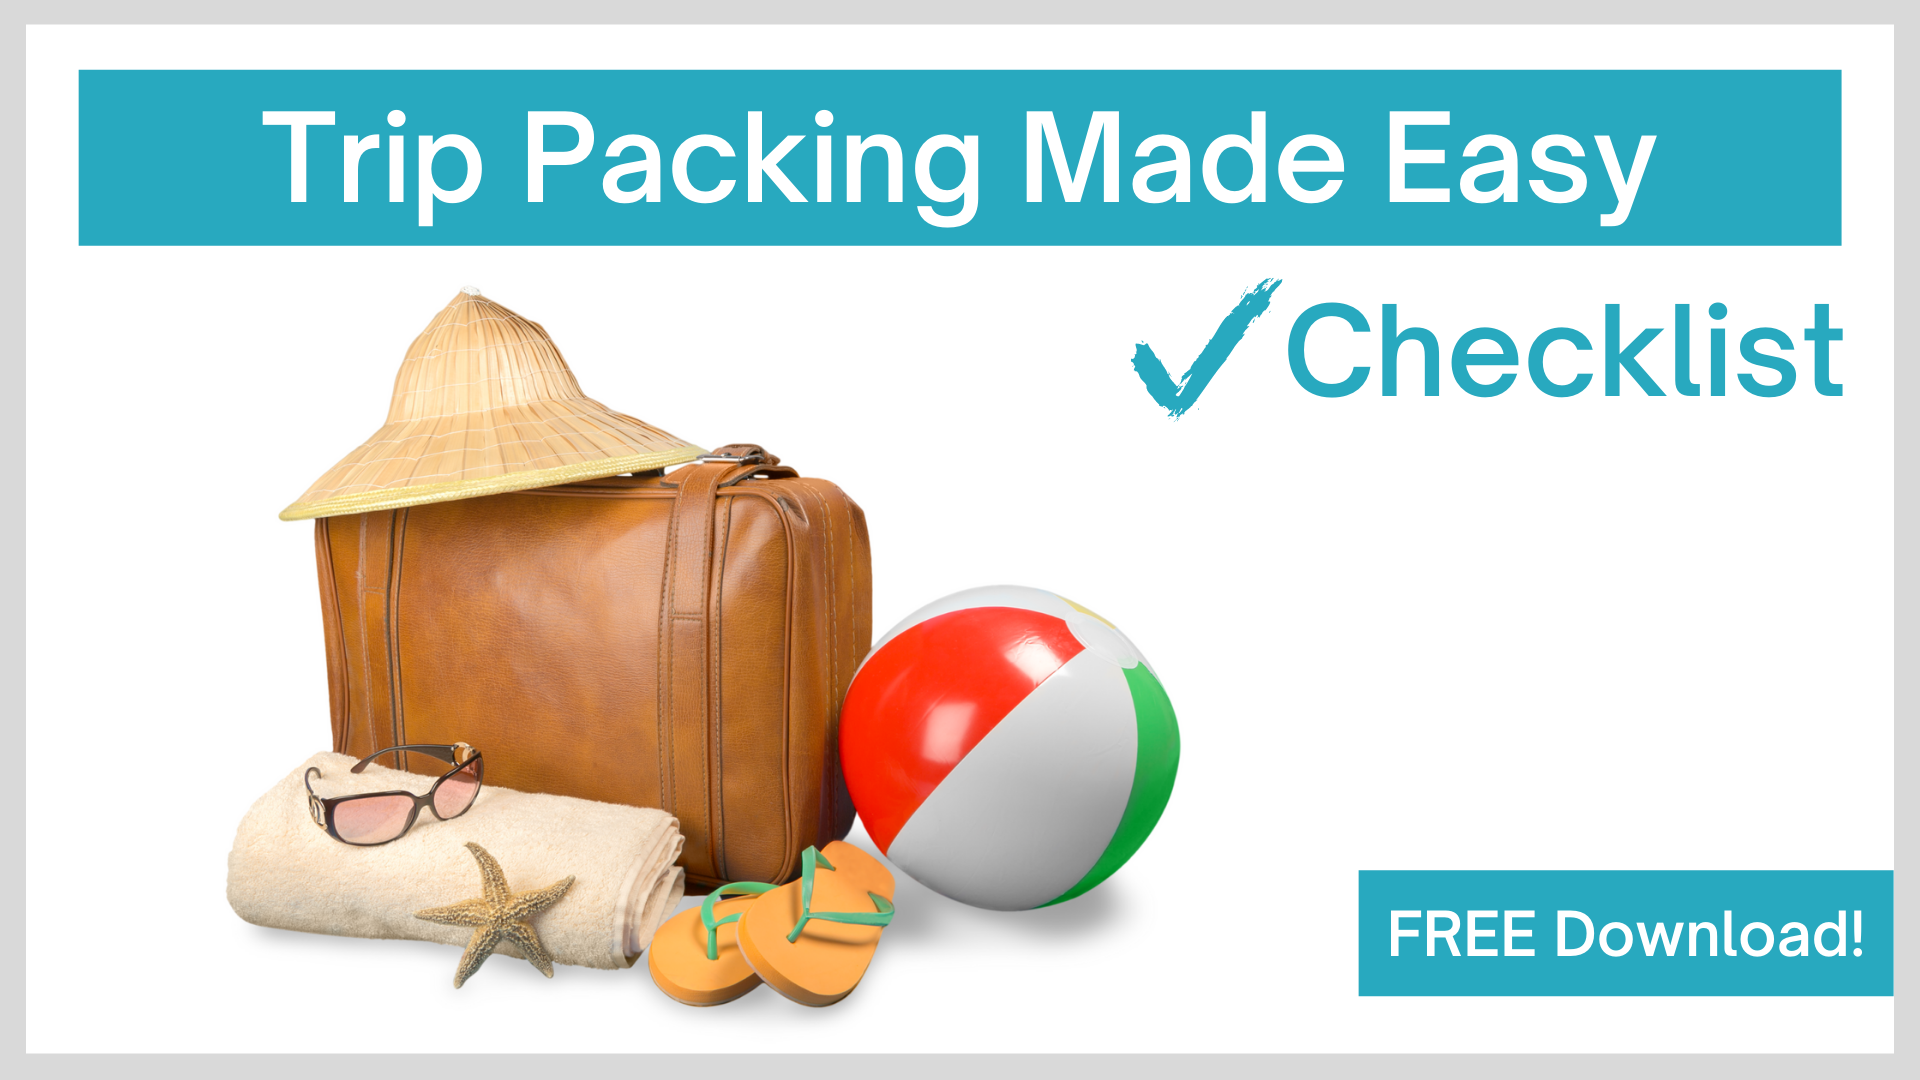 Trip Packing Made Easy Checklist